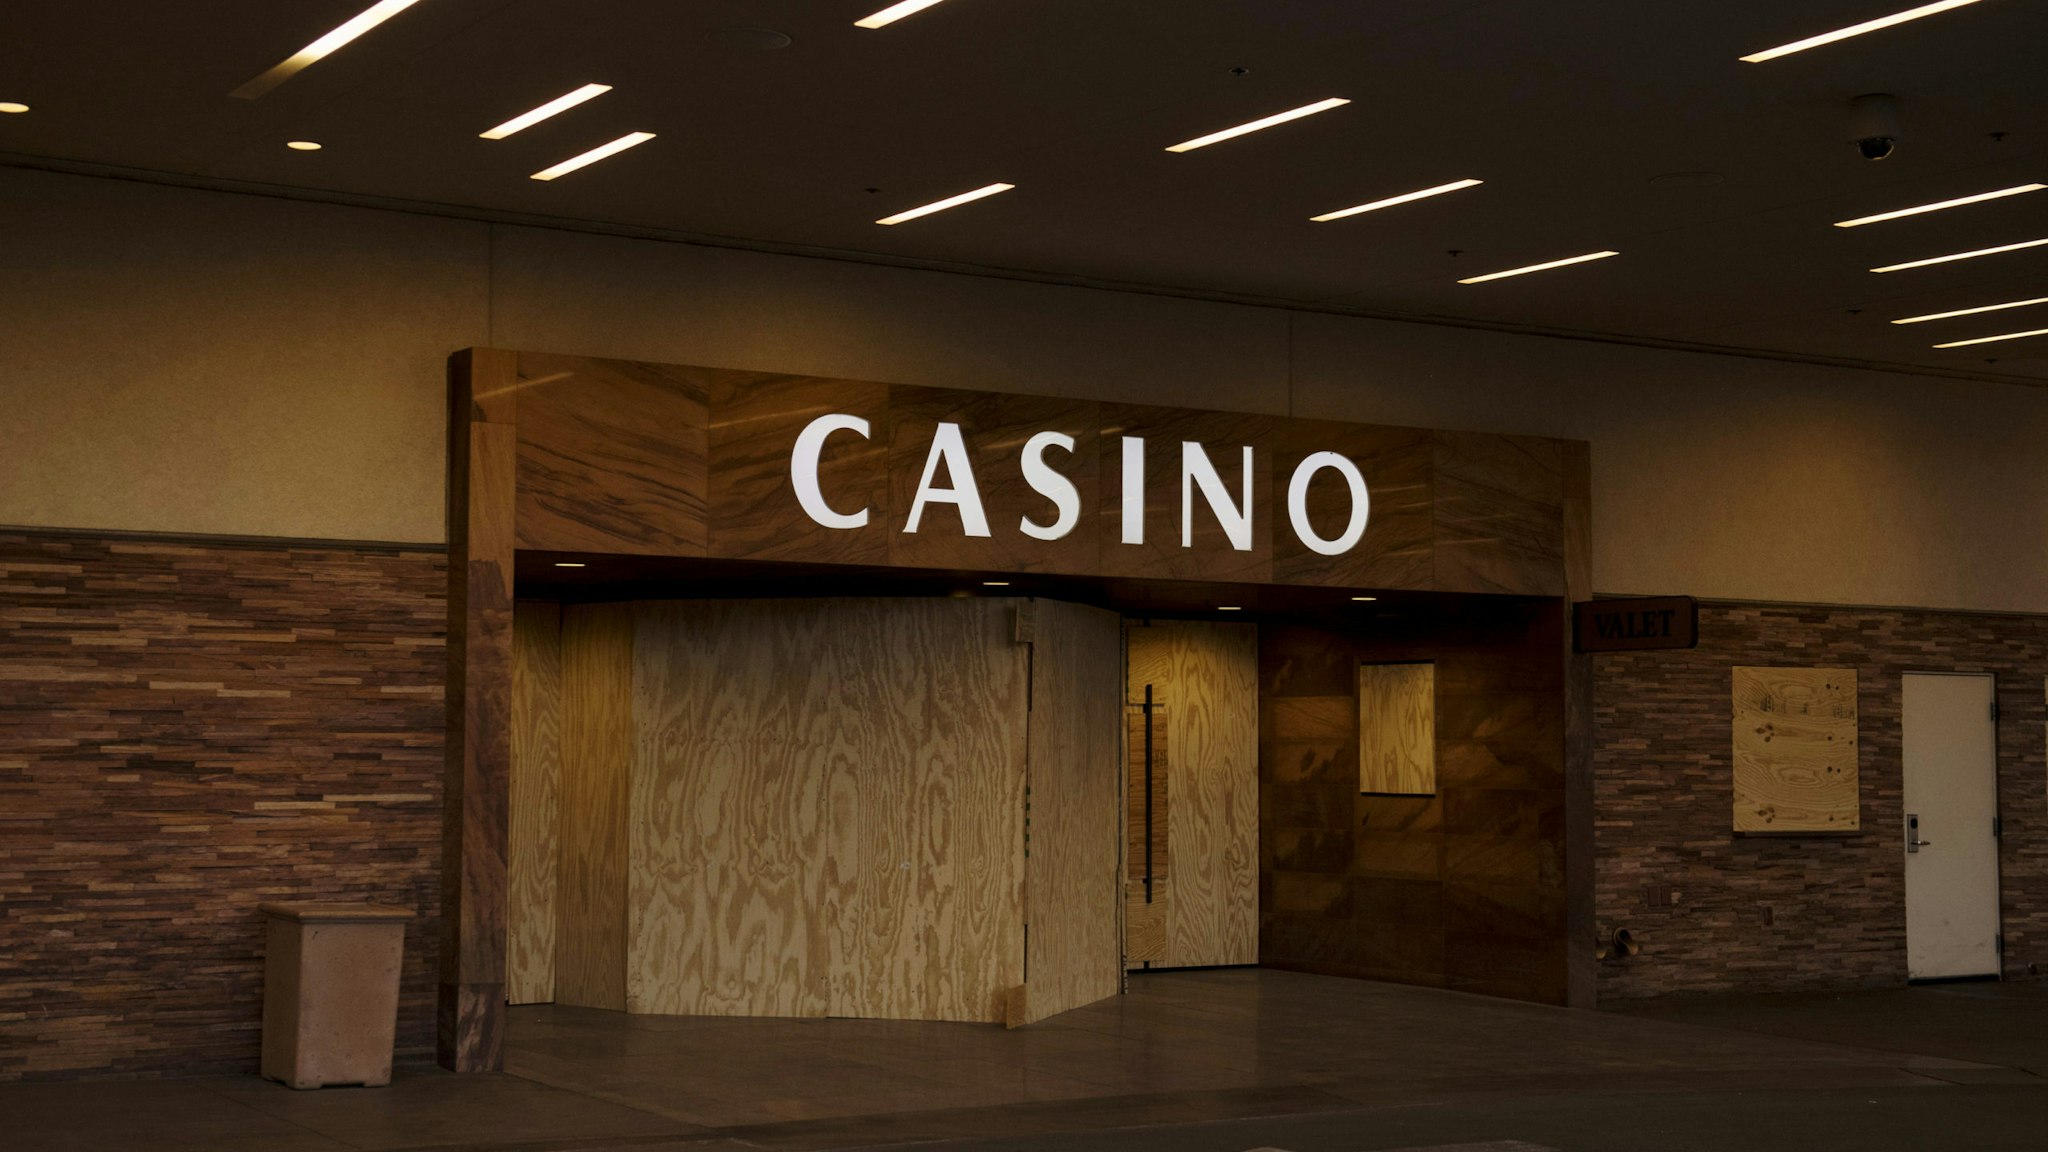 An entrance to Golden Gate hotel and casino is seen boarded up in Las Vegas, Nevada, U.S., on Wednesday, April 15, 2020. Nevada's governor ordered all casinos in the state to close for 30 days in mid-March to prevent the spread of the coronavirus and has since extended that order until April 30. Photographer: Bridget Bennett/Bloomberg via Getty Images